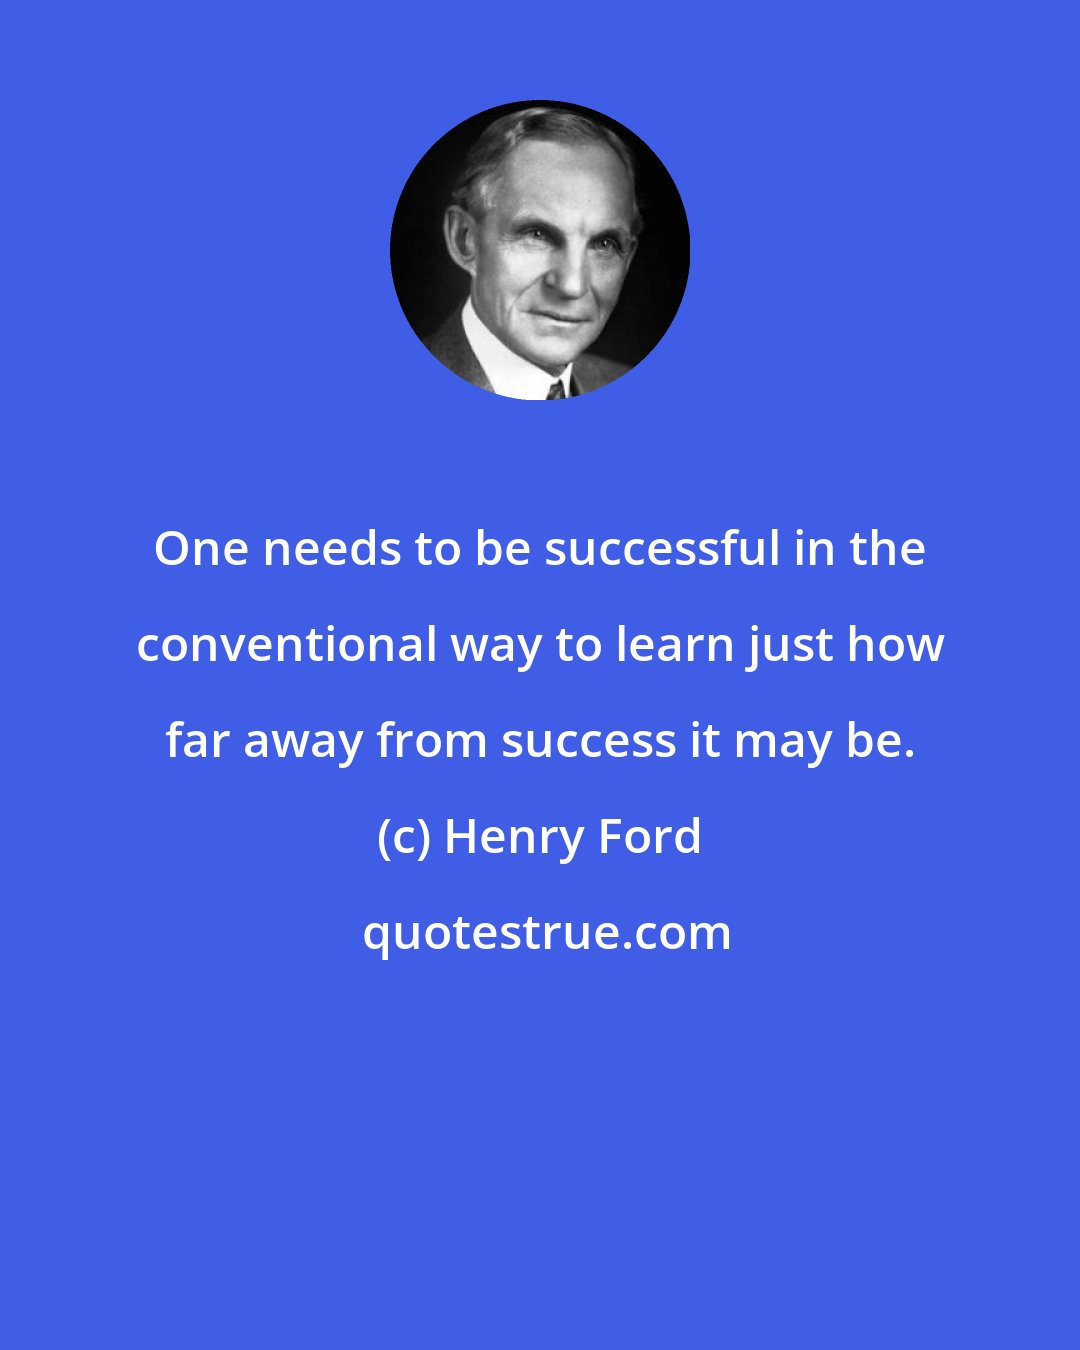 Henry Ford: One needs to be successful in the conventional way to learn just how far away from success it may be.